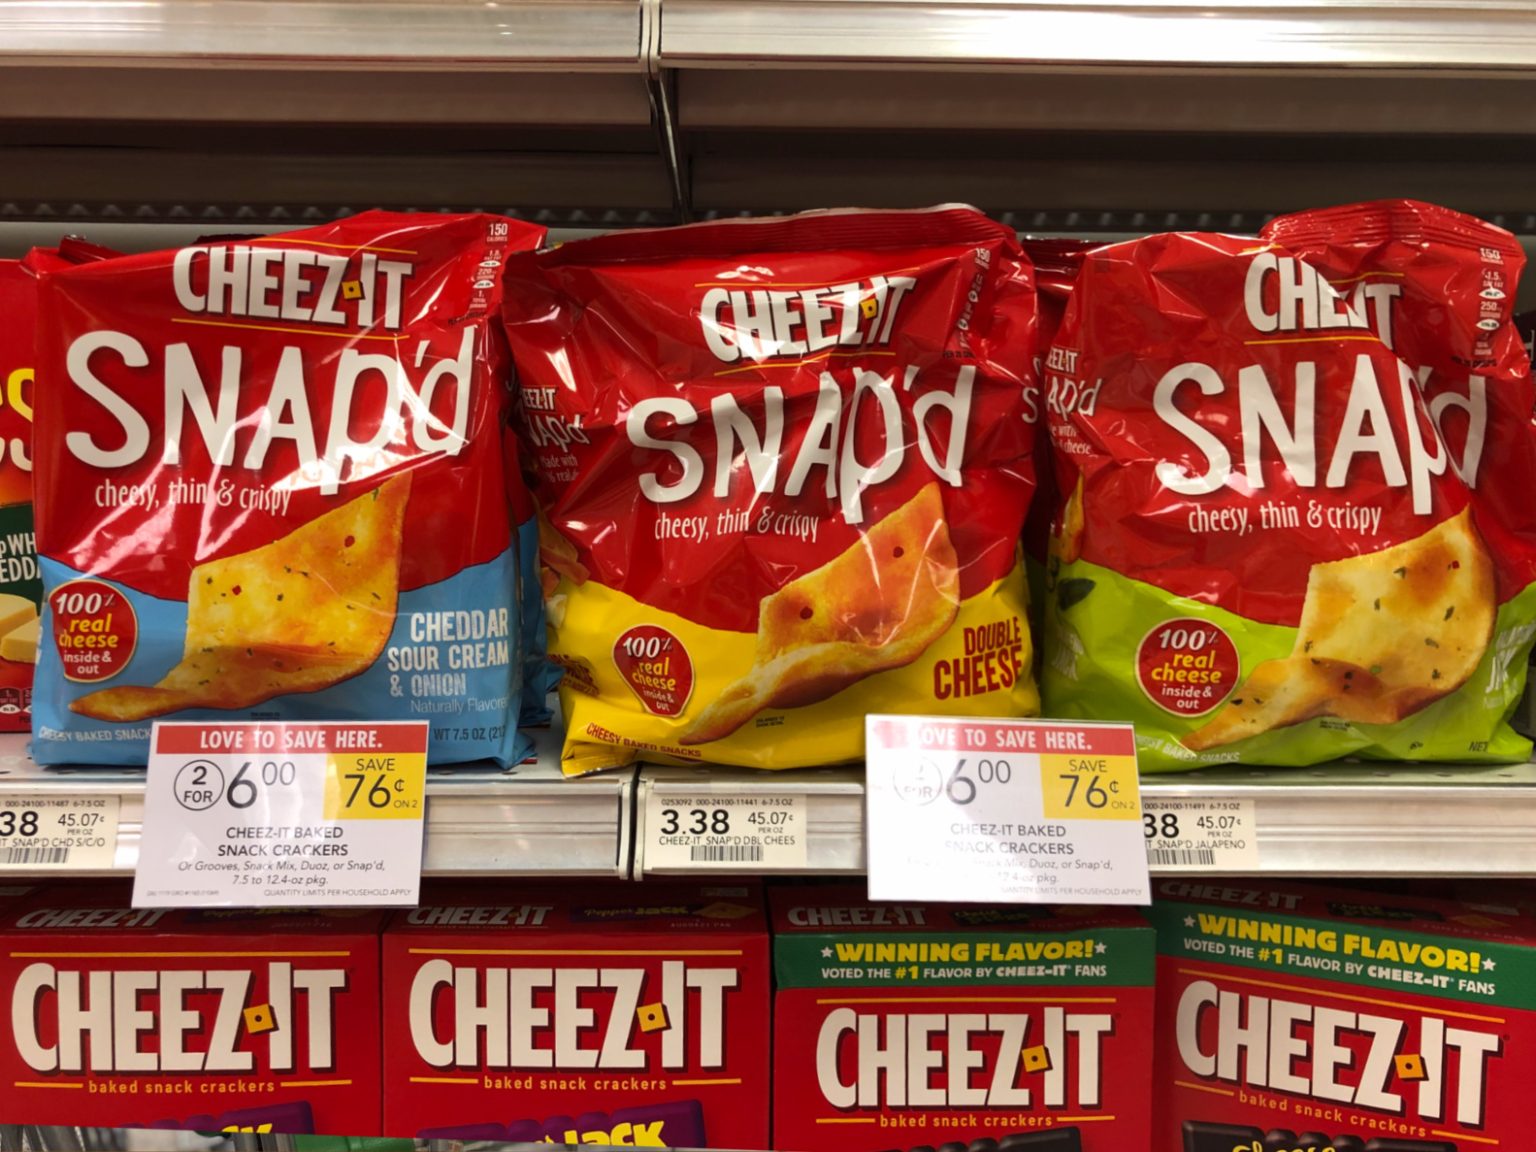 Don't Miss The Deal On Cheez-It Snap'd - Be Ready For Holiday Entertaining!